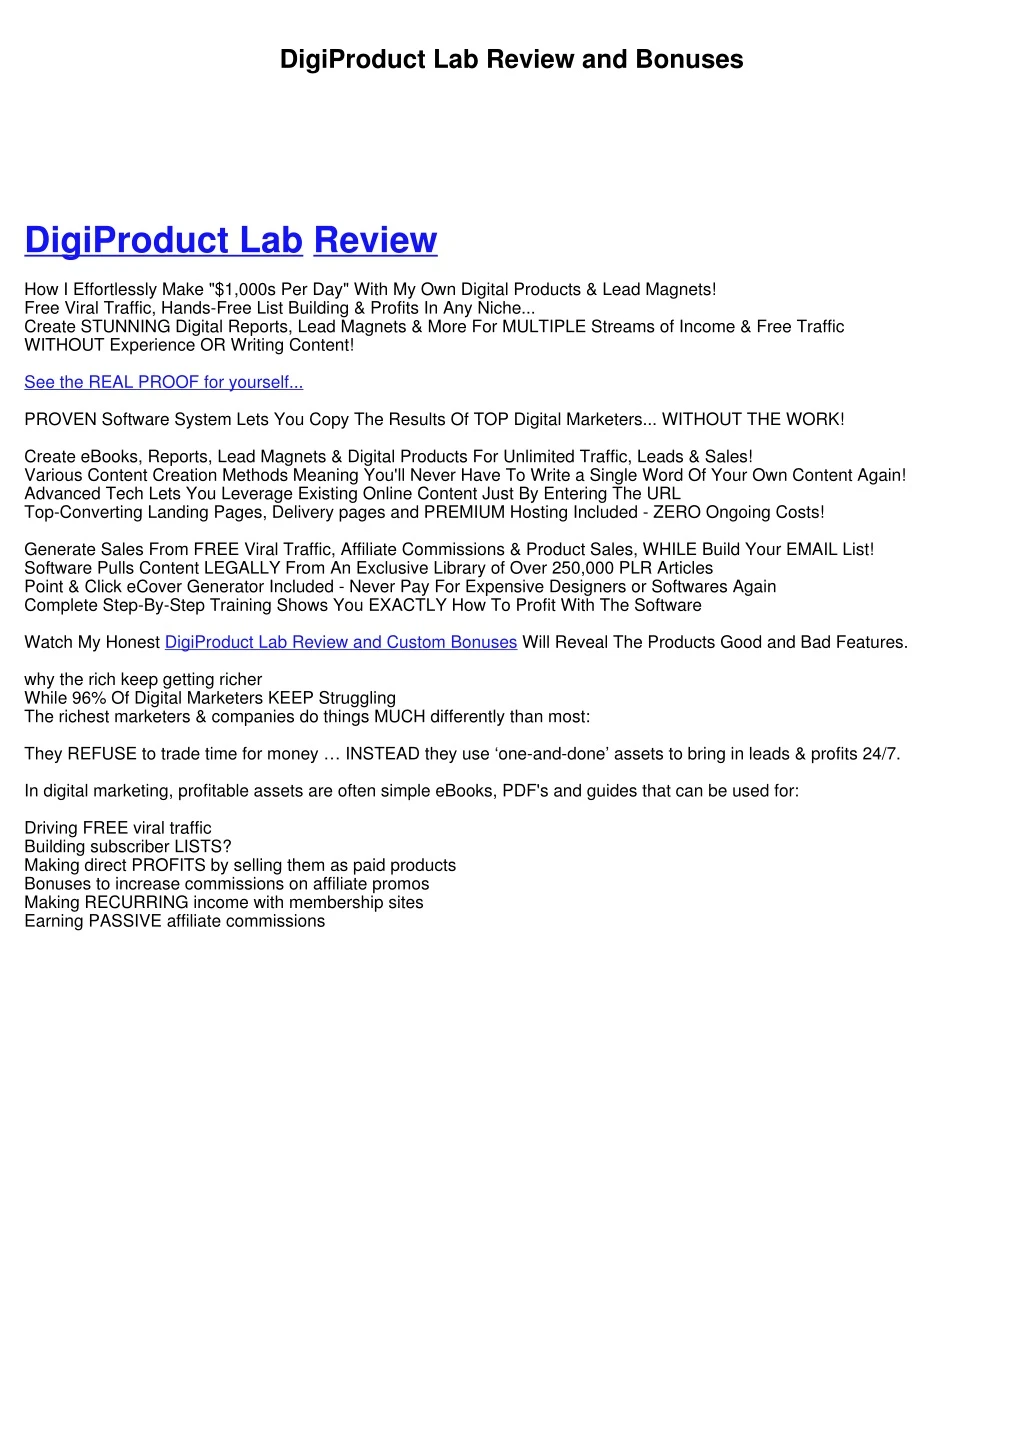 digiproduct lab review and bonuses